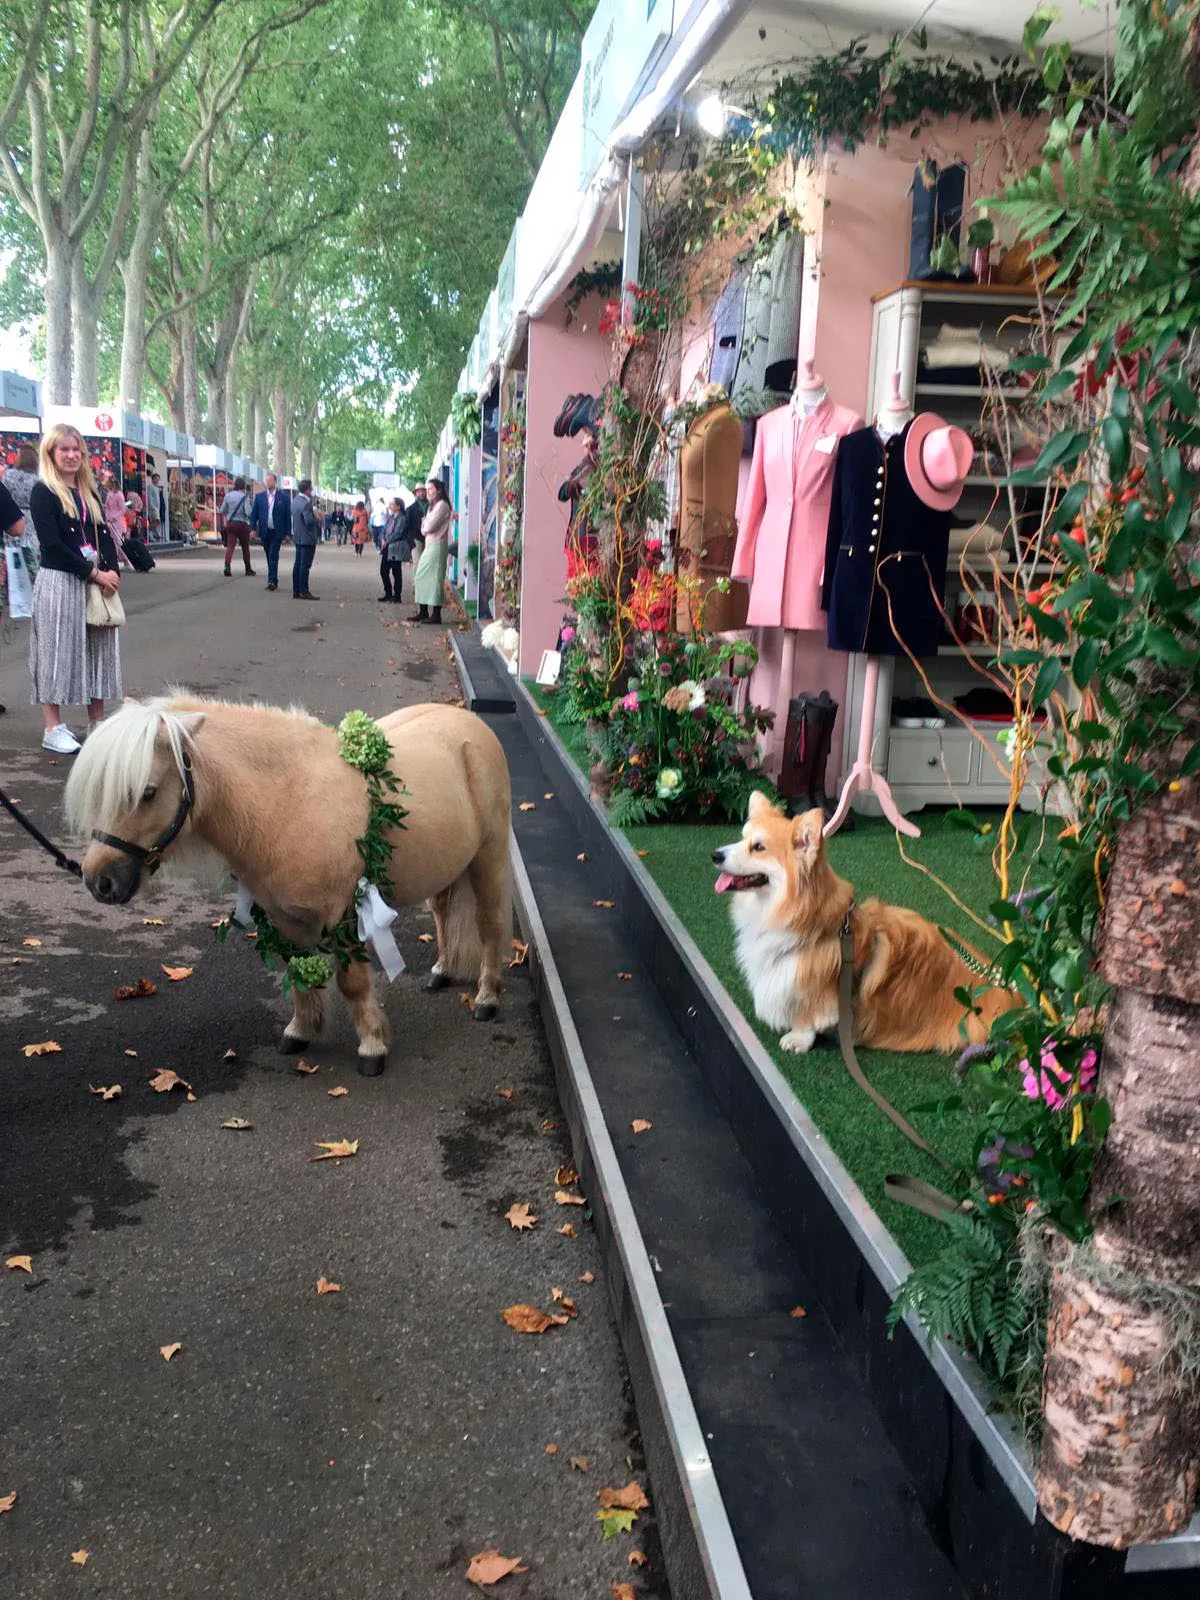 Tiny horse meets cute dog. There's literally something for everyone at Chelsea.